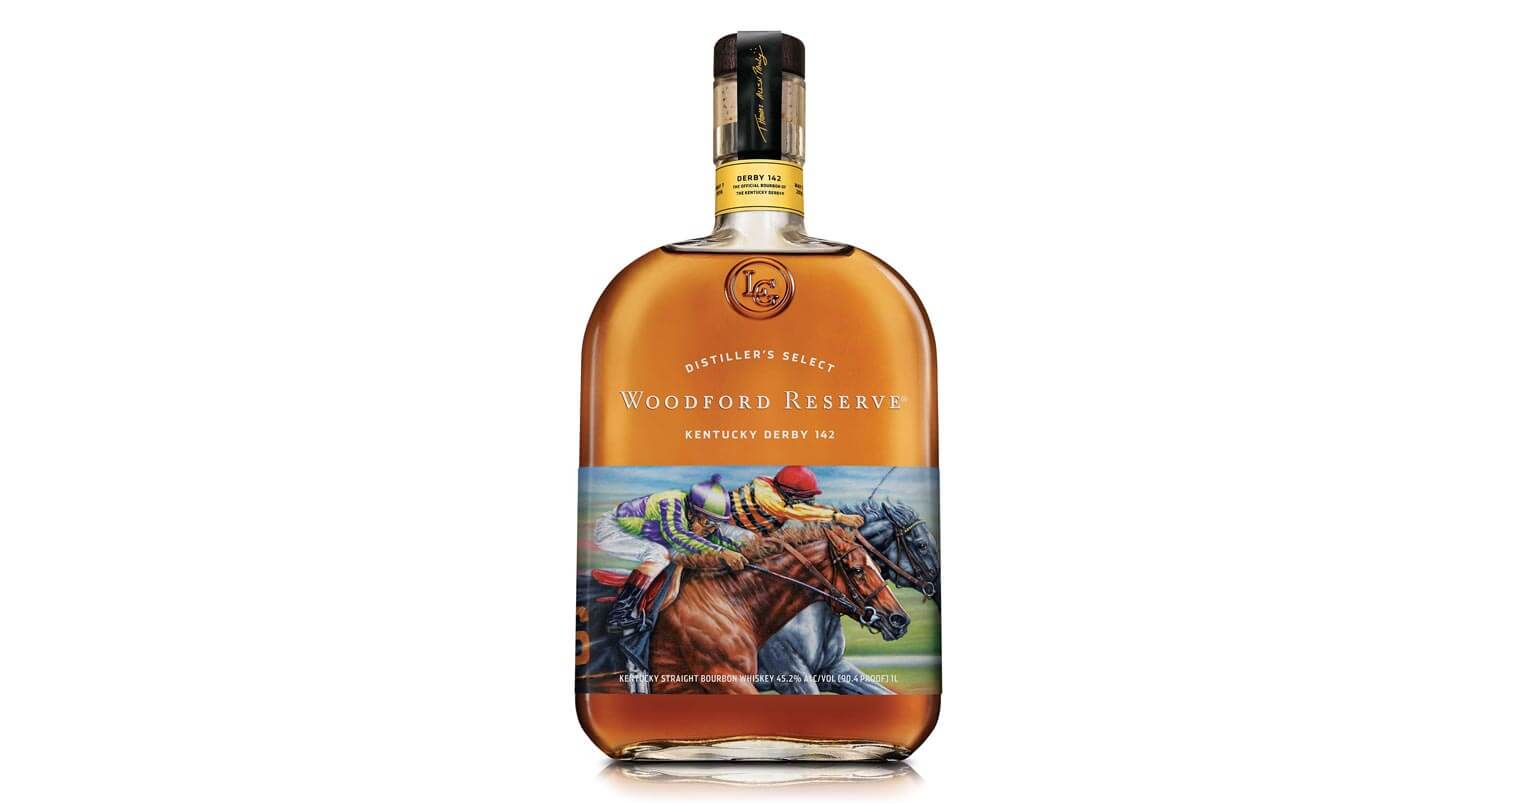 Woodford Reserve Named Official Bourbon of Belmont Park and Saratoga Race Course, featured image